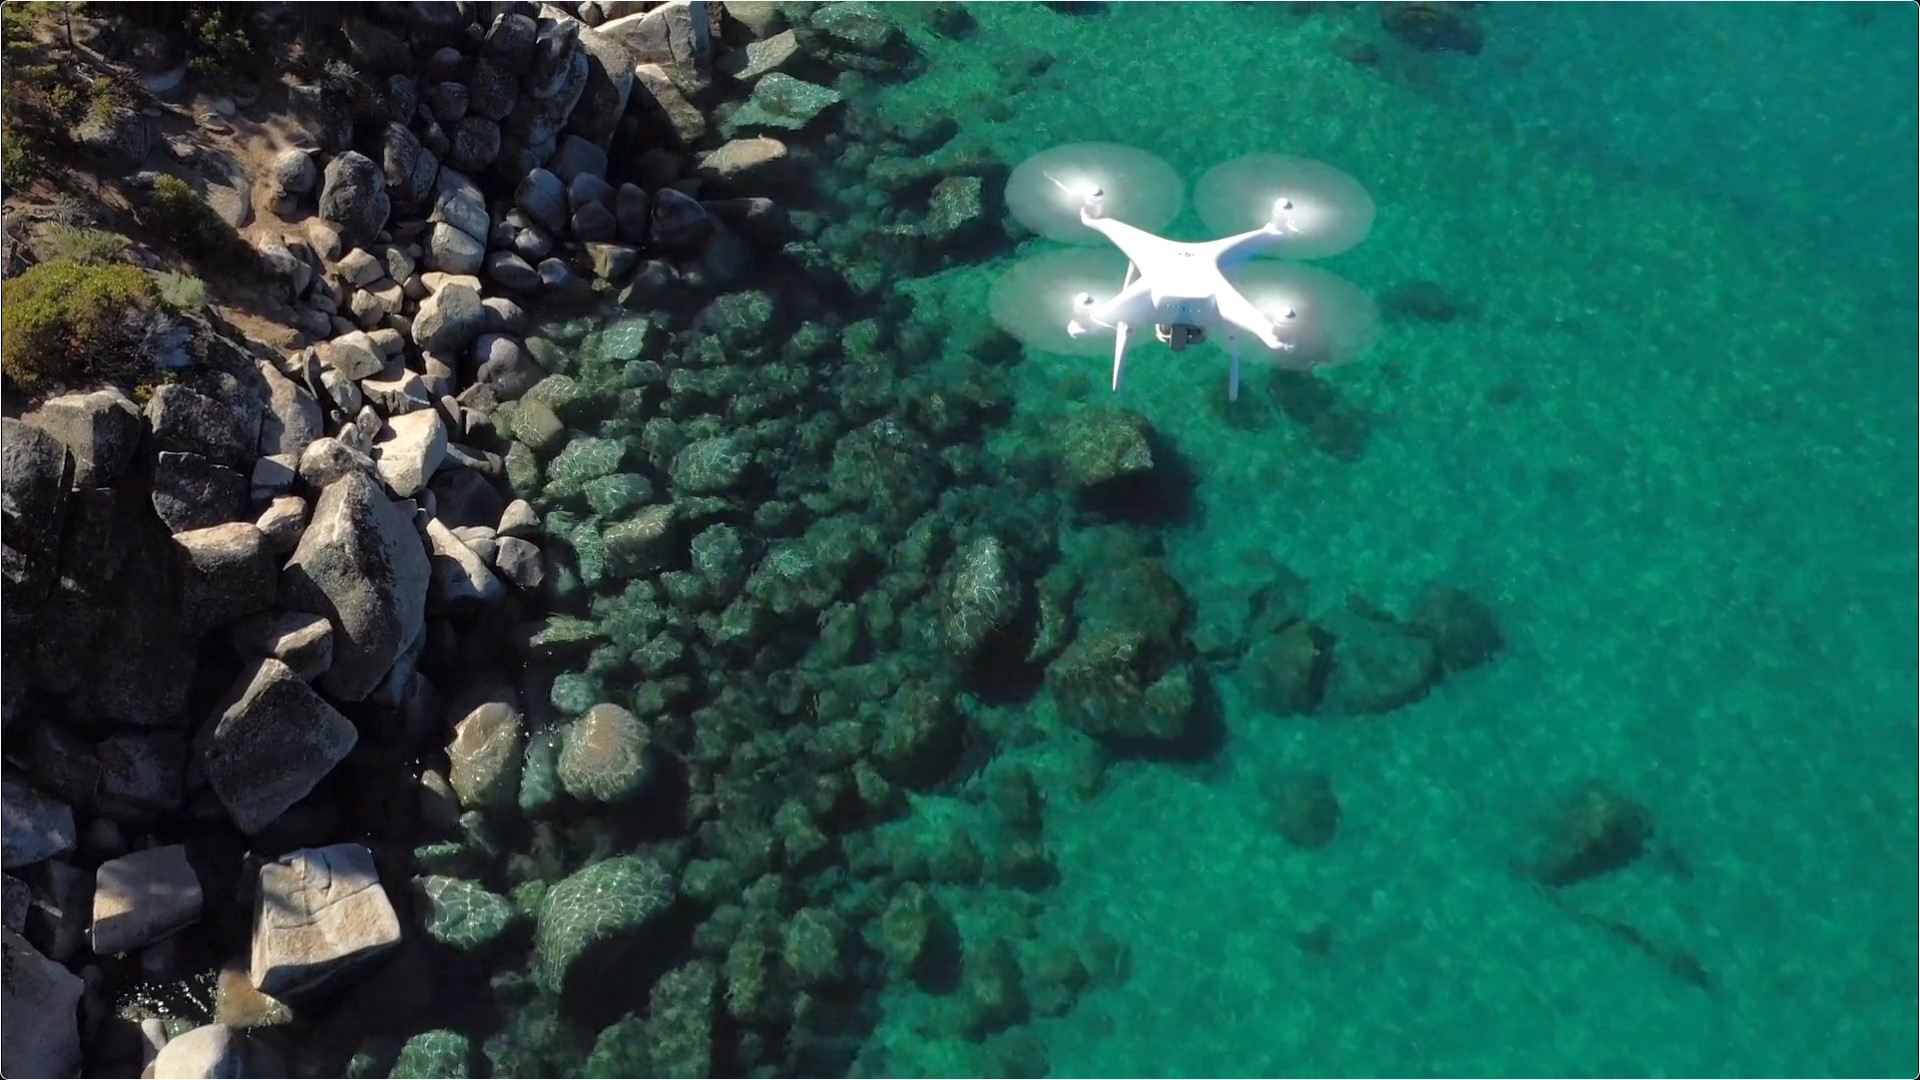 Drone monitoring of nearshore periphyton monitoring site.